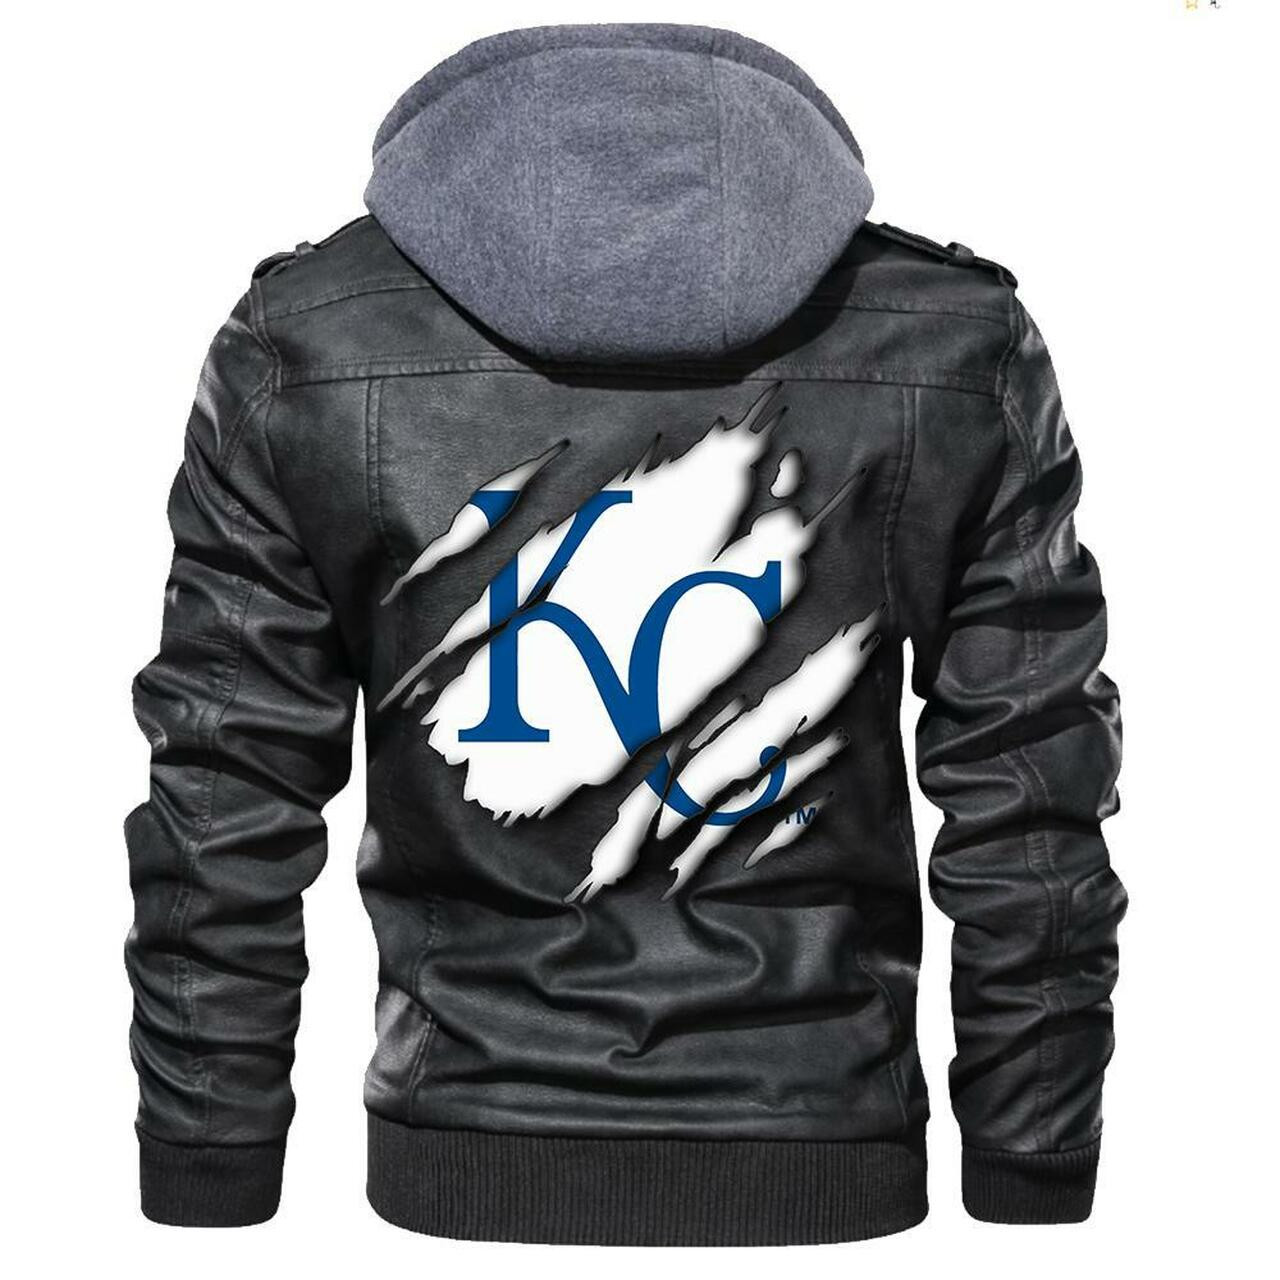 Check out and find the right leather jacket below 405